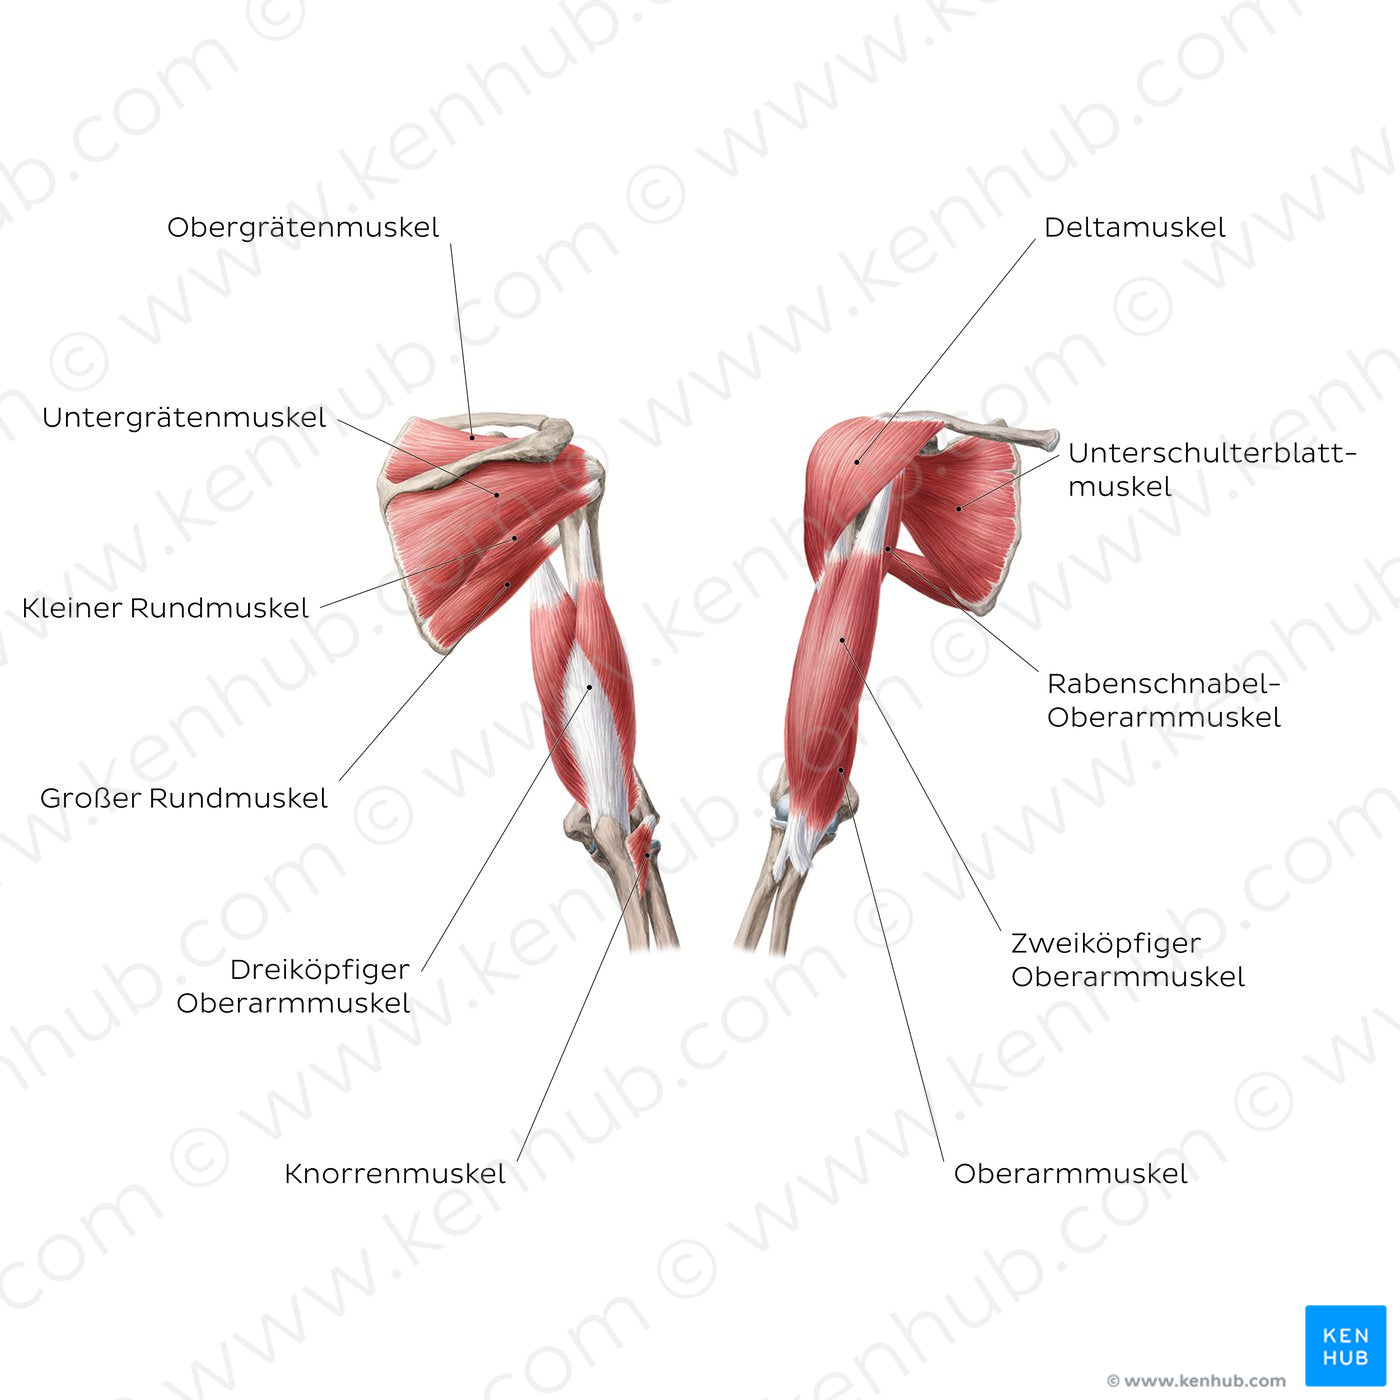 Muscles of the arm and shoulder (German)